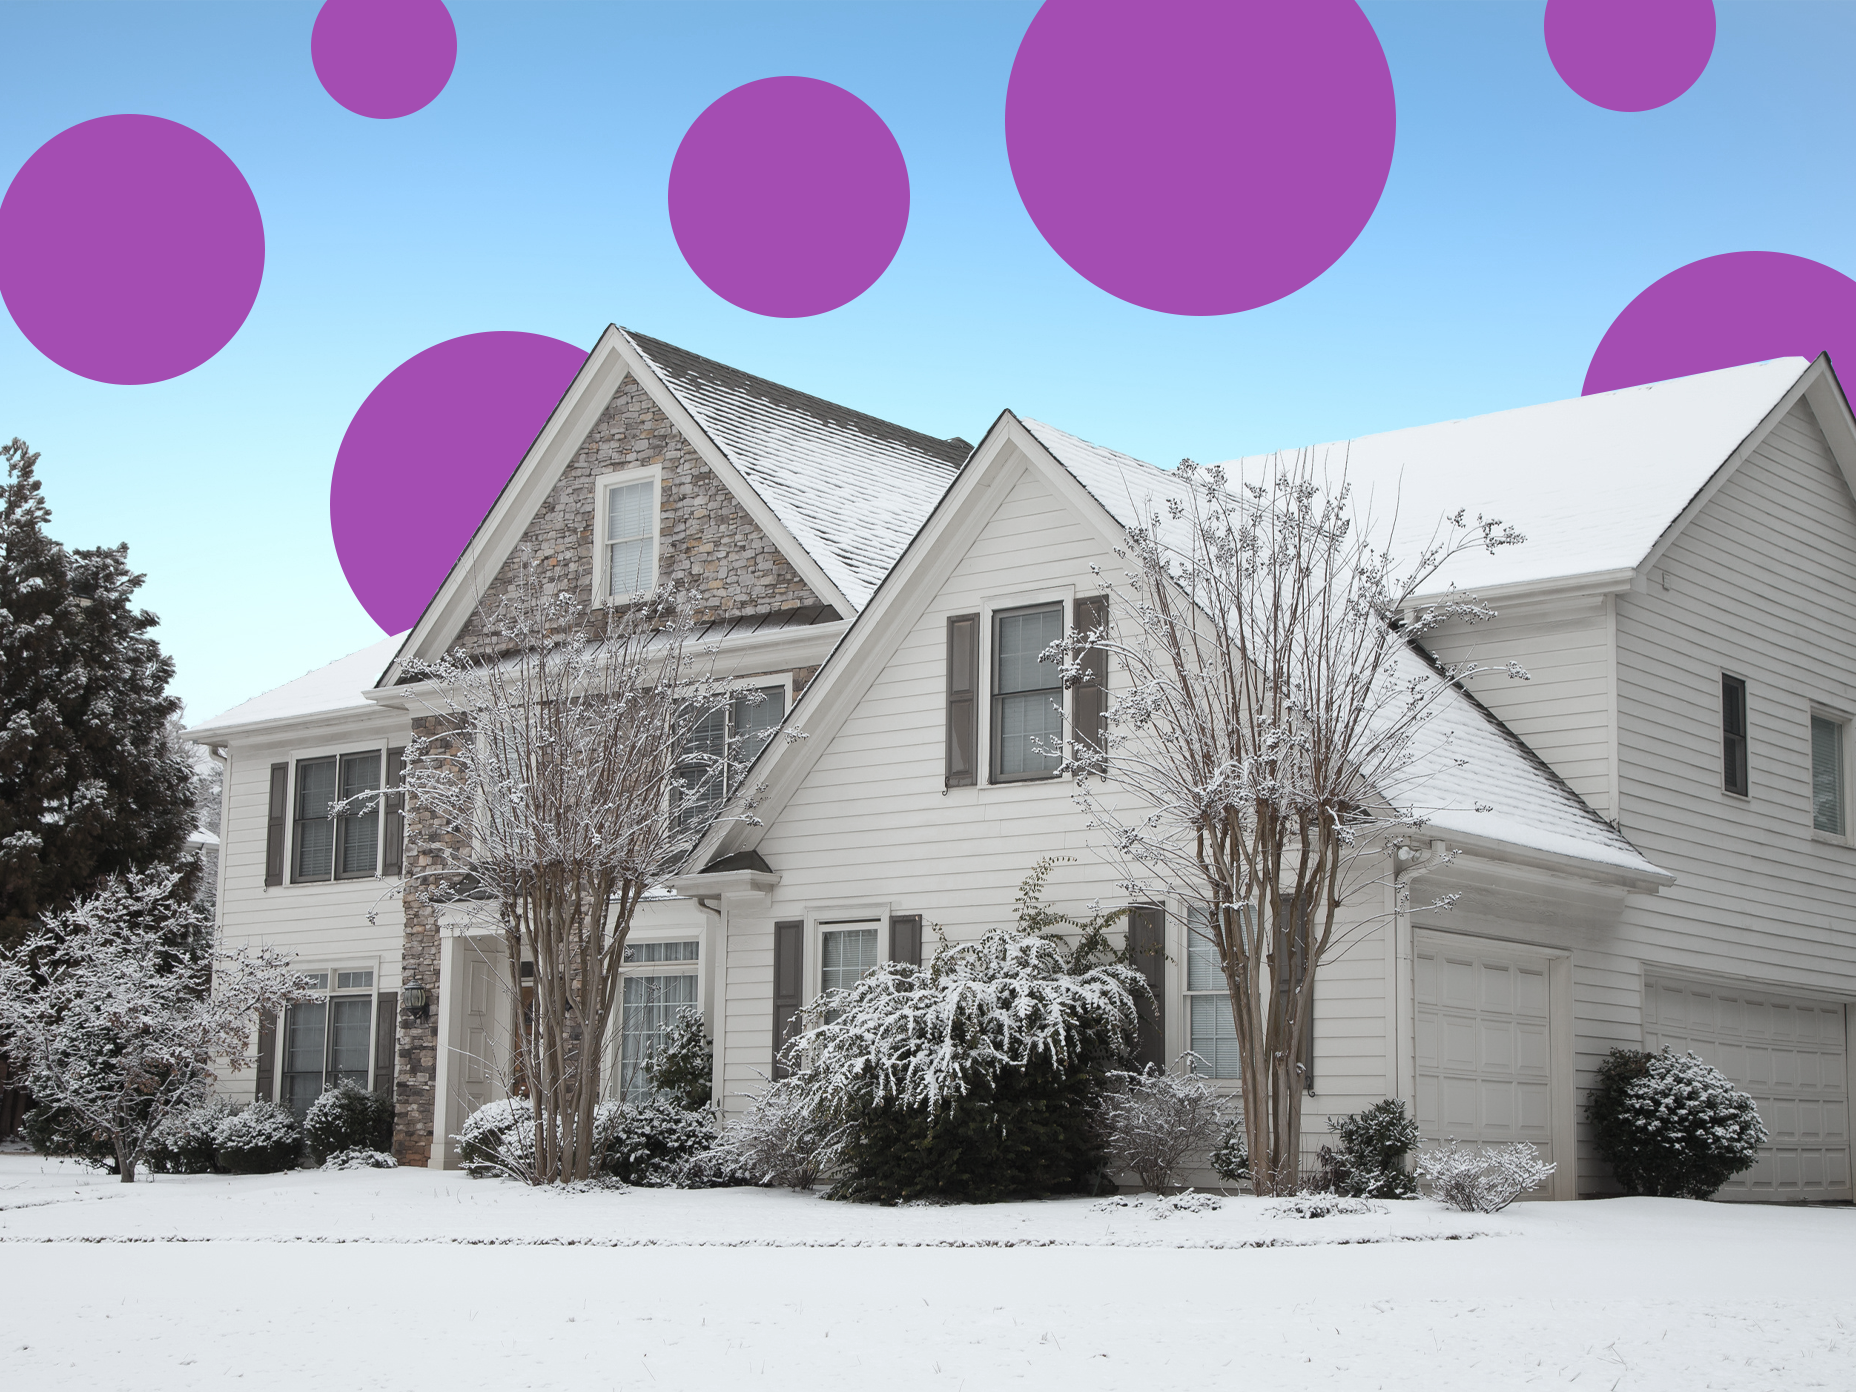  How to Winterize a House